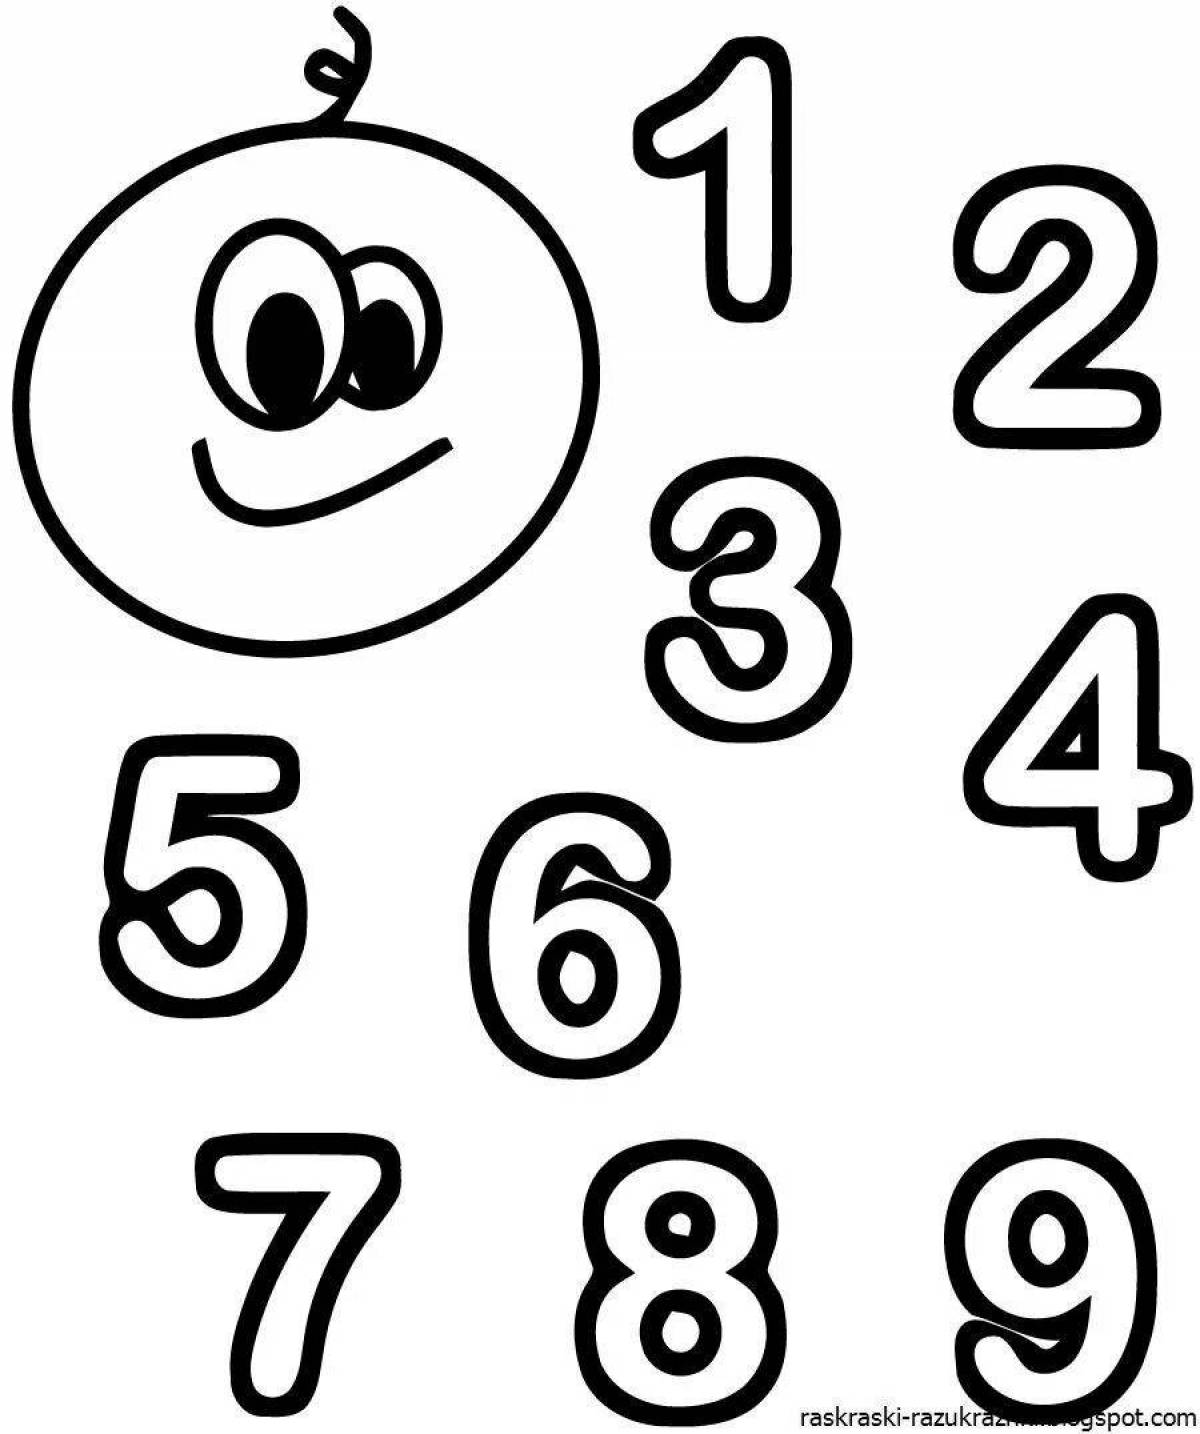 Coloring pages with page numbers from 1 to 10 for children